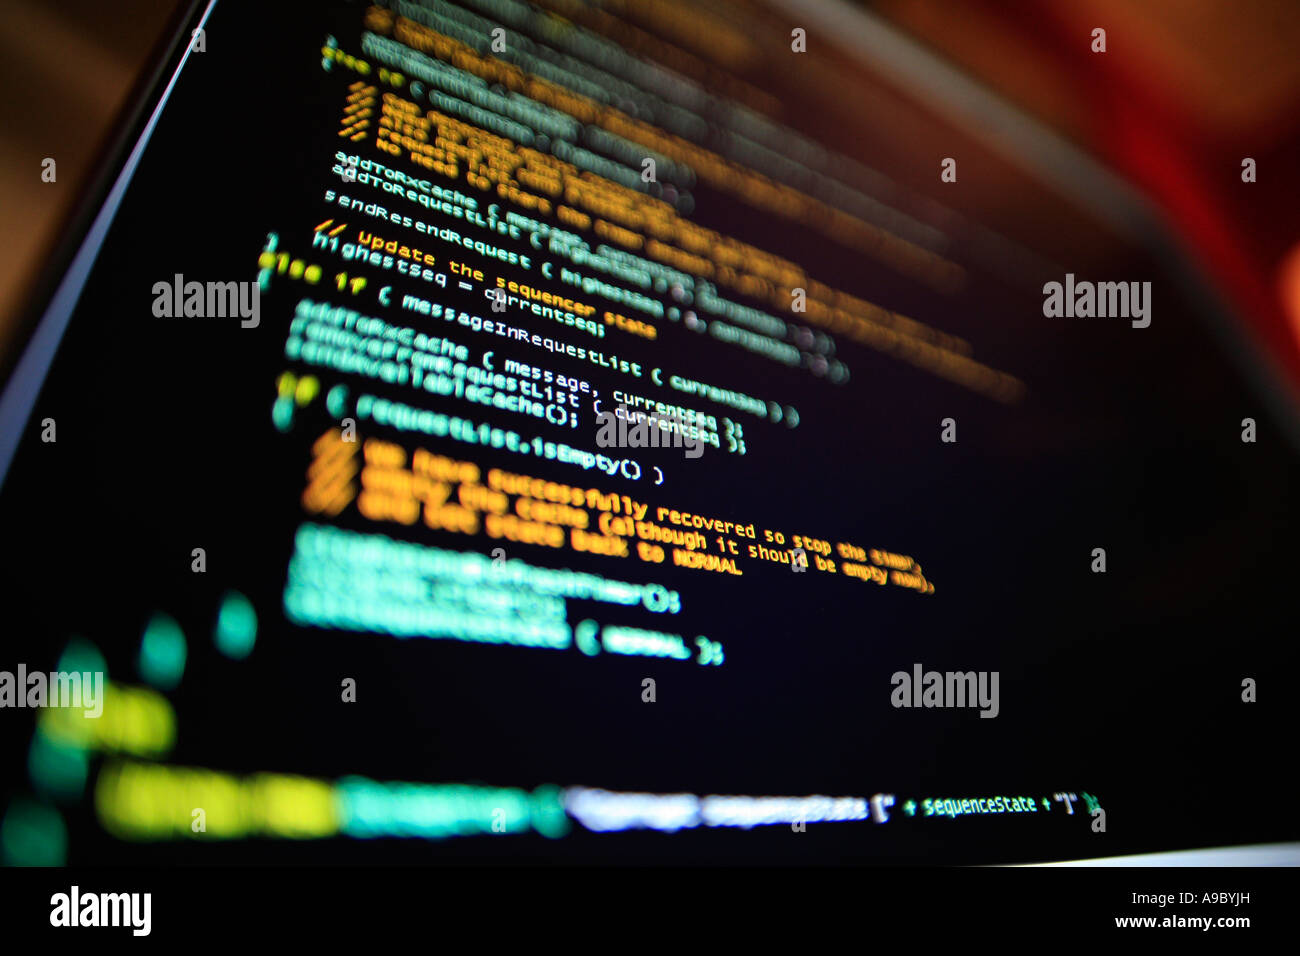 Highly technical looking computer program on screen in darkened room Stock Photo